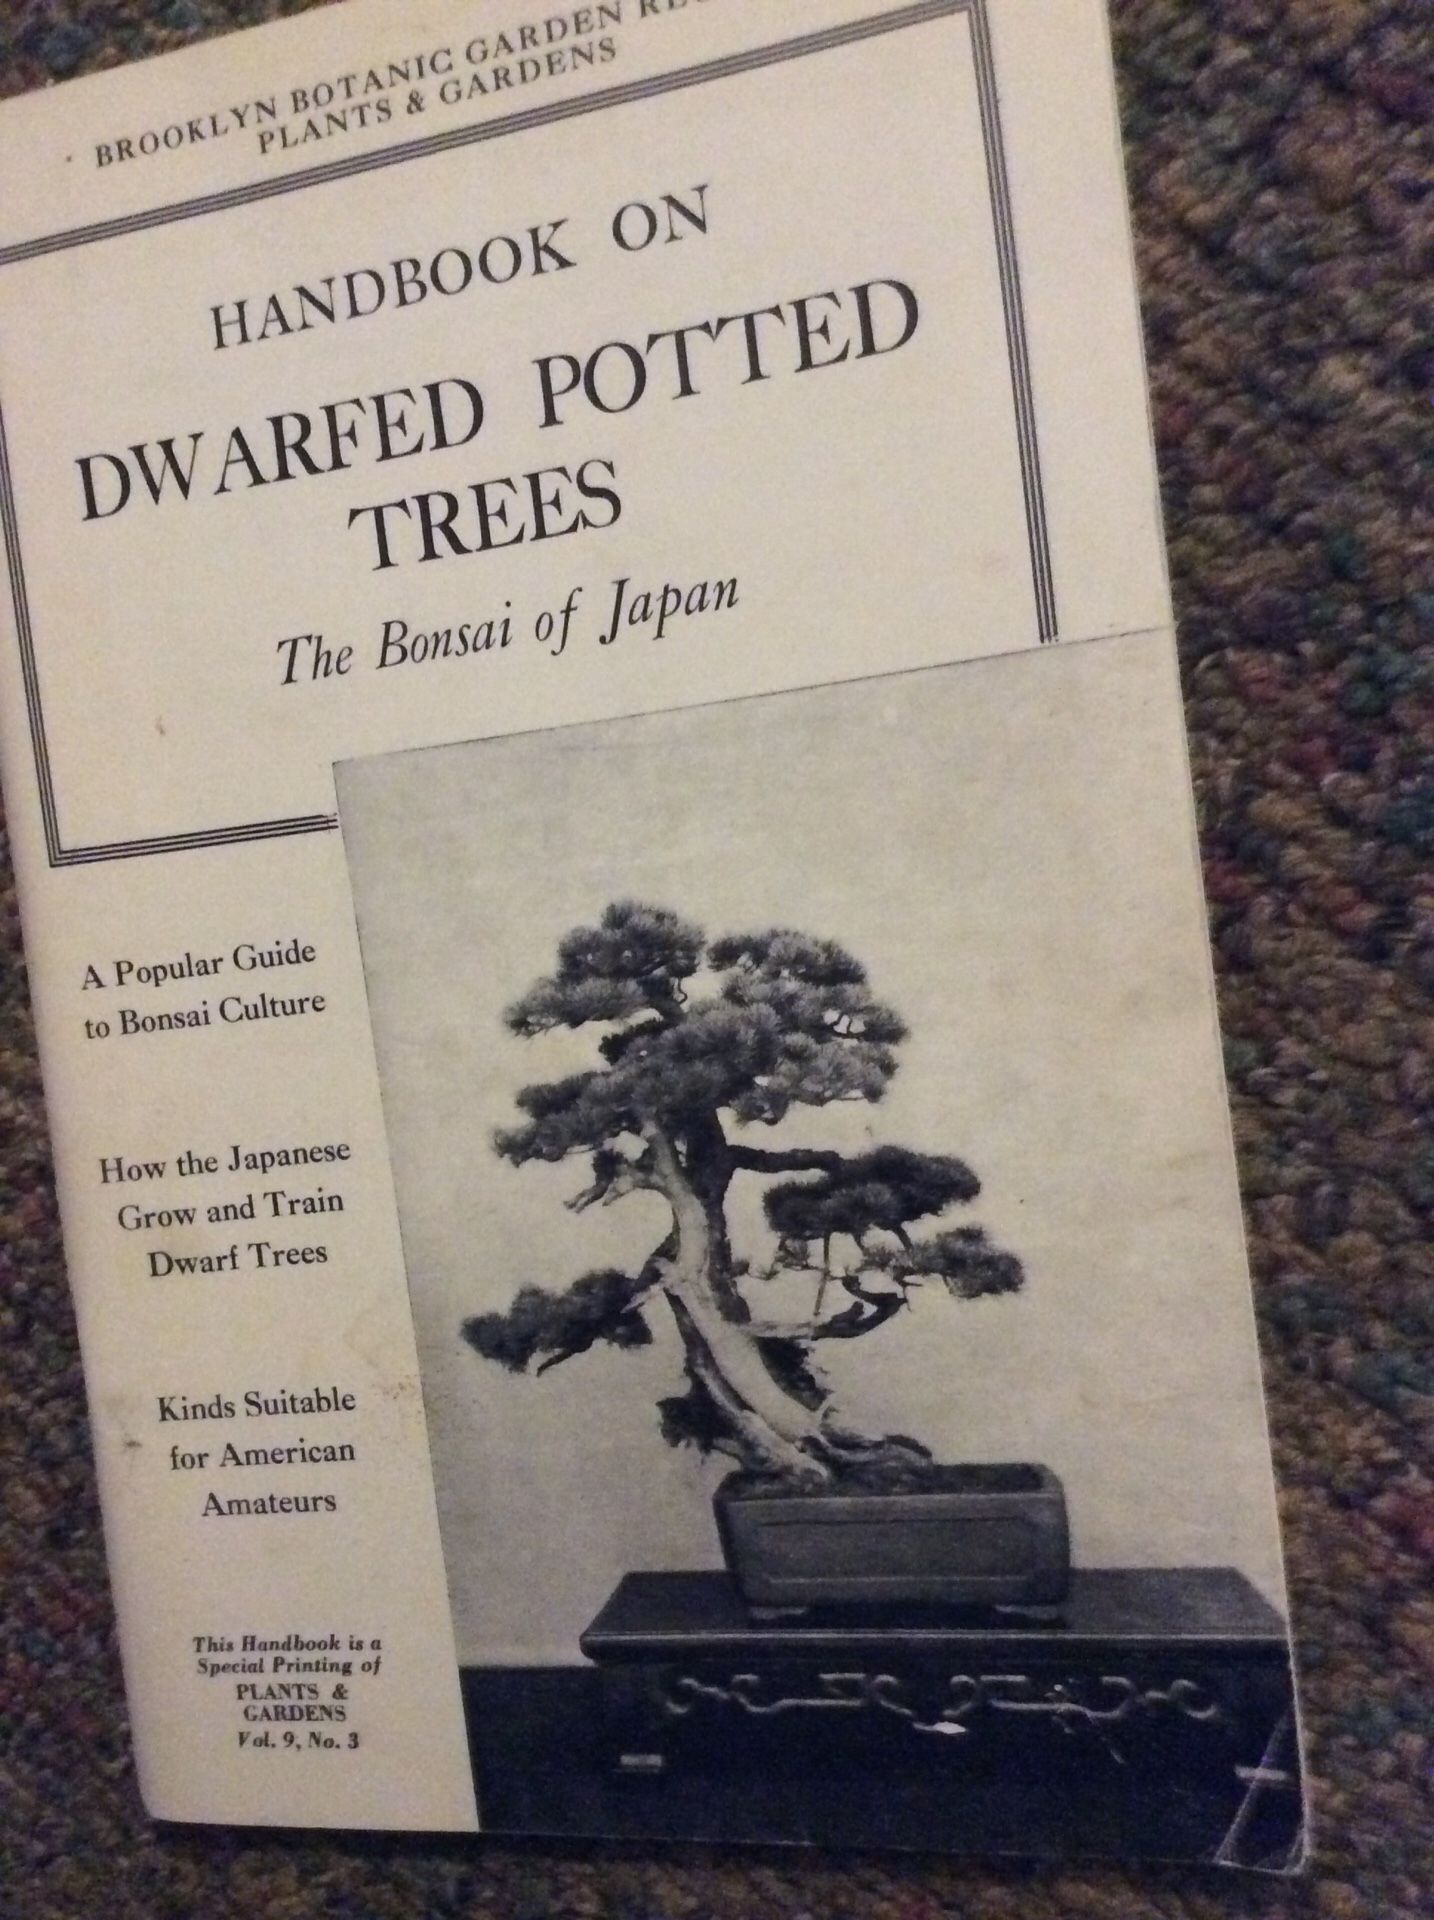 HANDBOOK ON DWARFED POTTED TREES - THE BONSAI OF JAPAN - BROOKLYN BOTANIC GARDEN RECORD PLANTS AND GARDENS NUMBER 3 A Popular Guide to Bonsai Culture